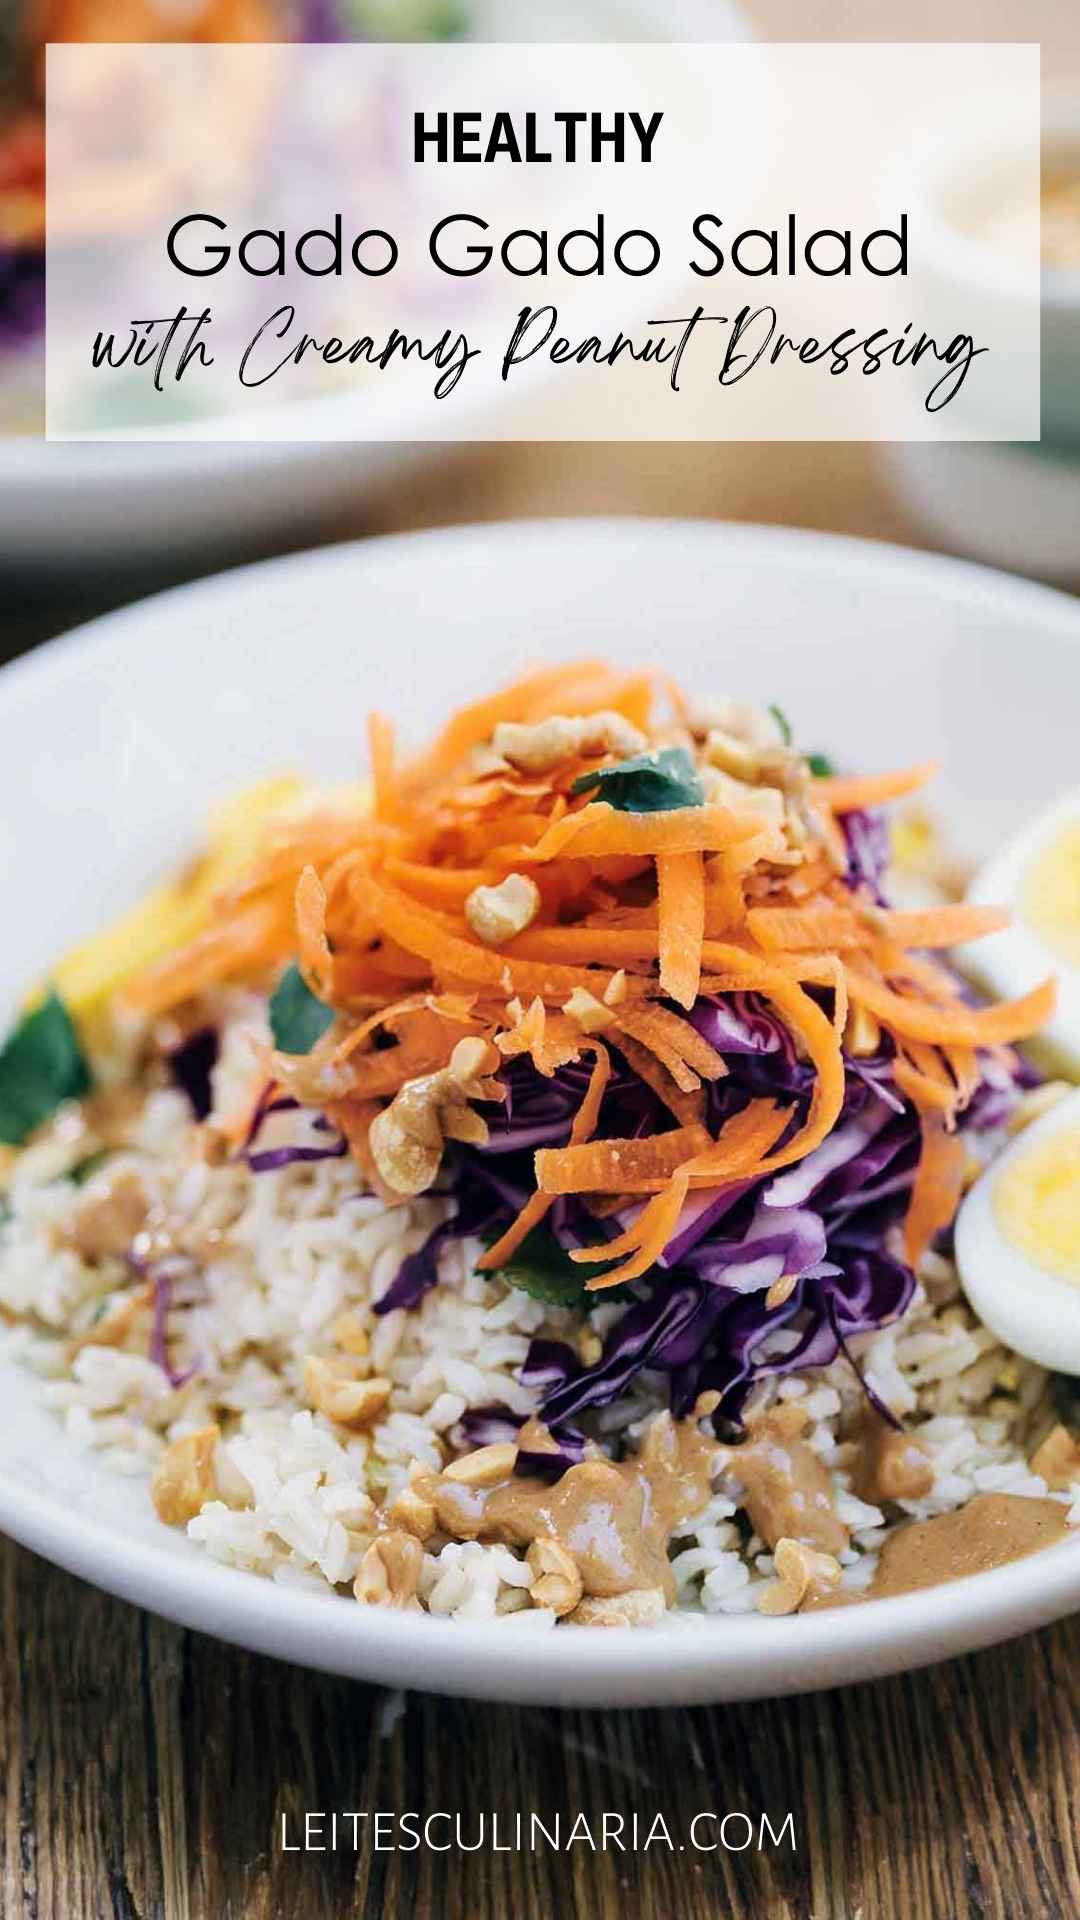 A white bowl filled with gado gado salad with rice, cabbage, carrots, peanuts, egg, and creamy peanut dressing.